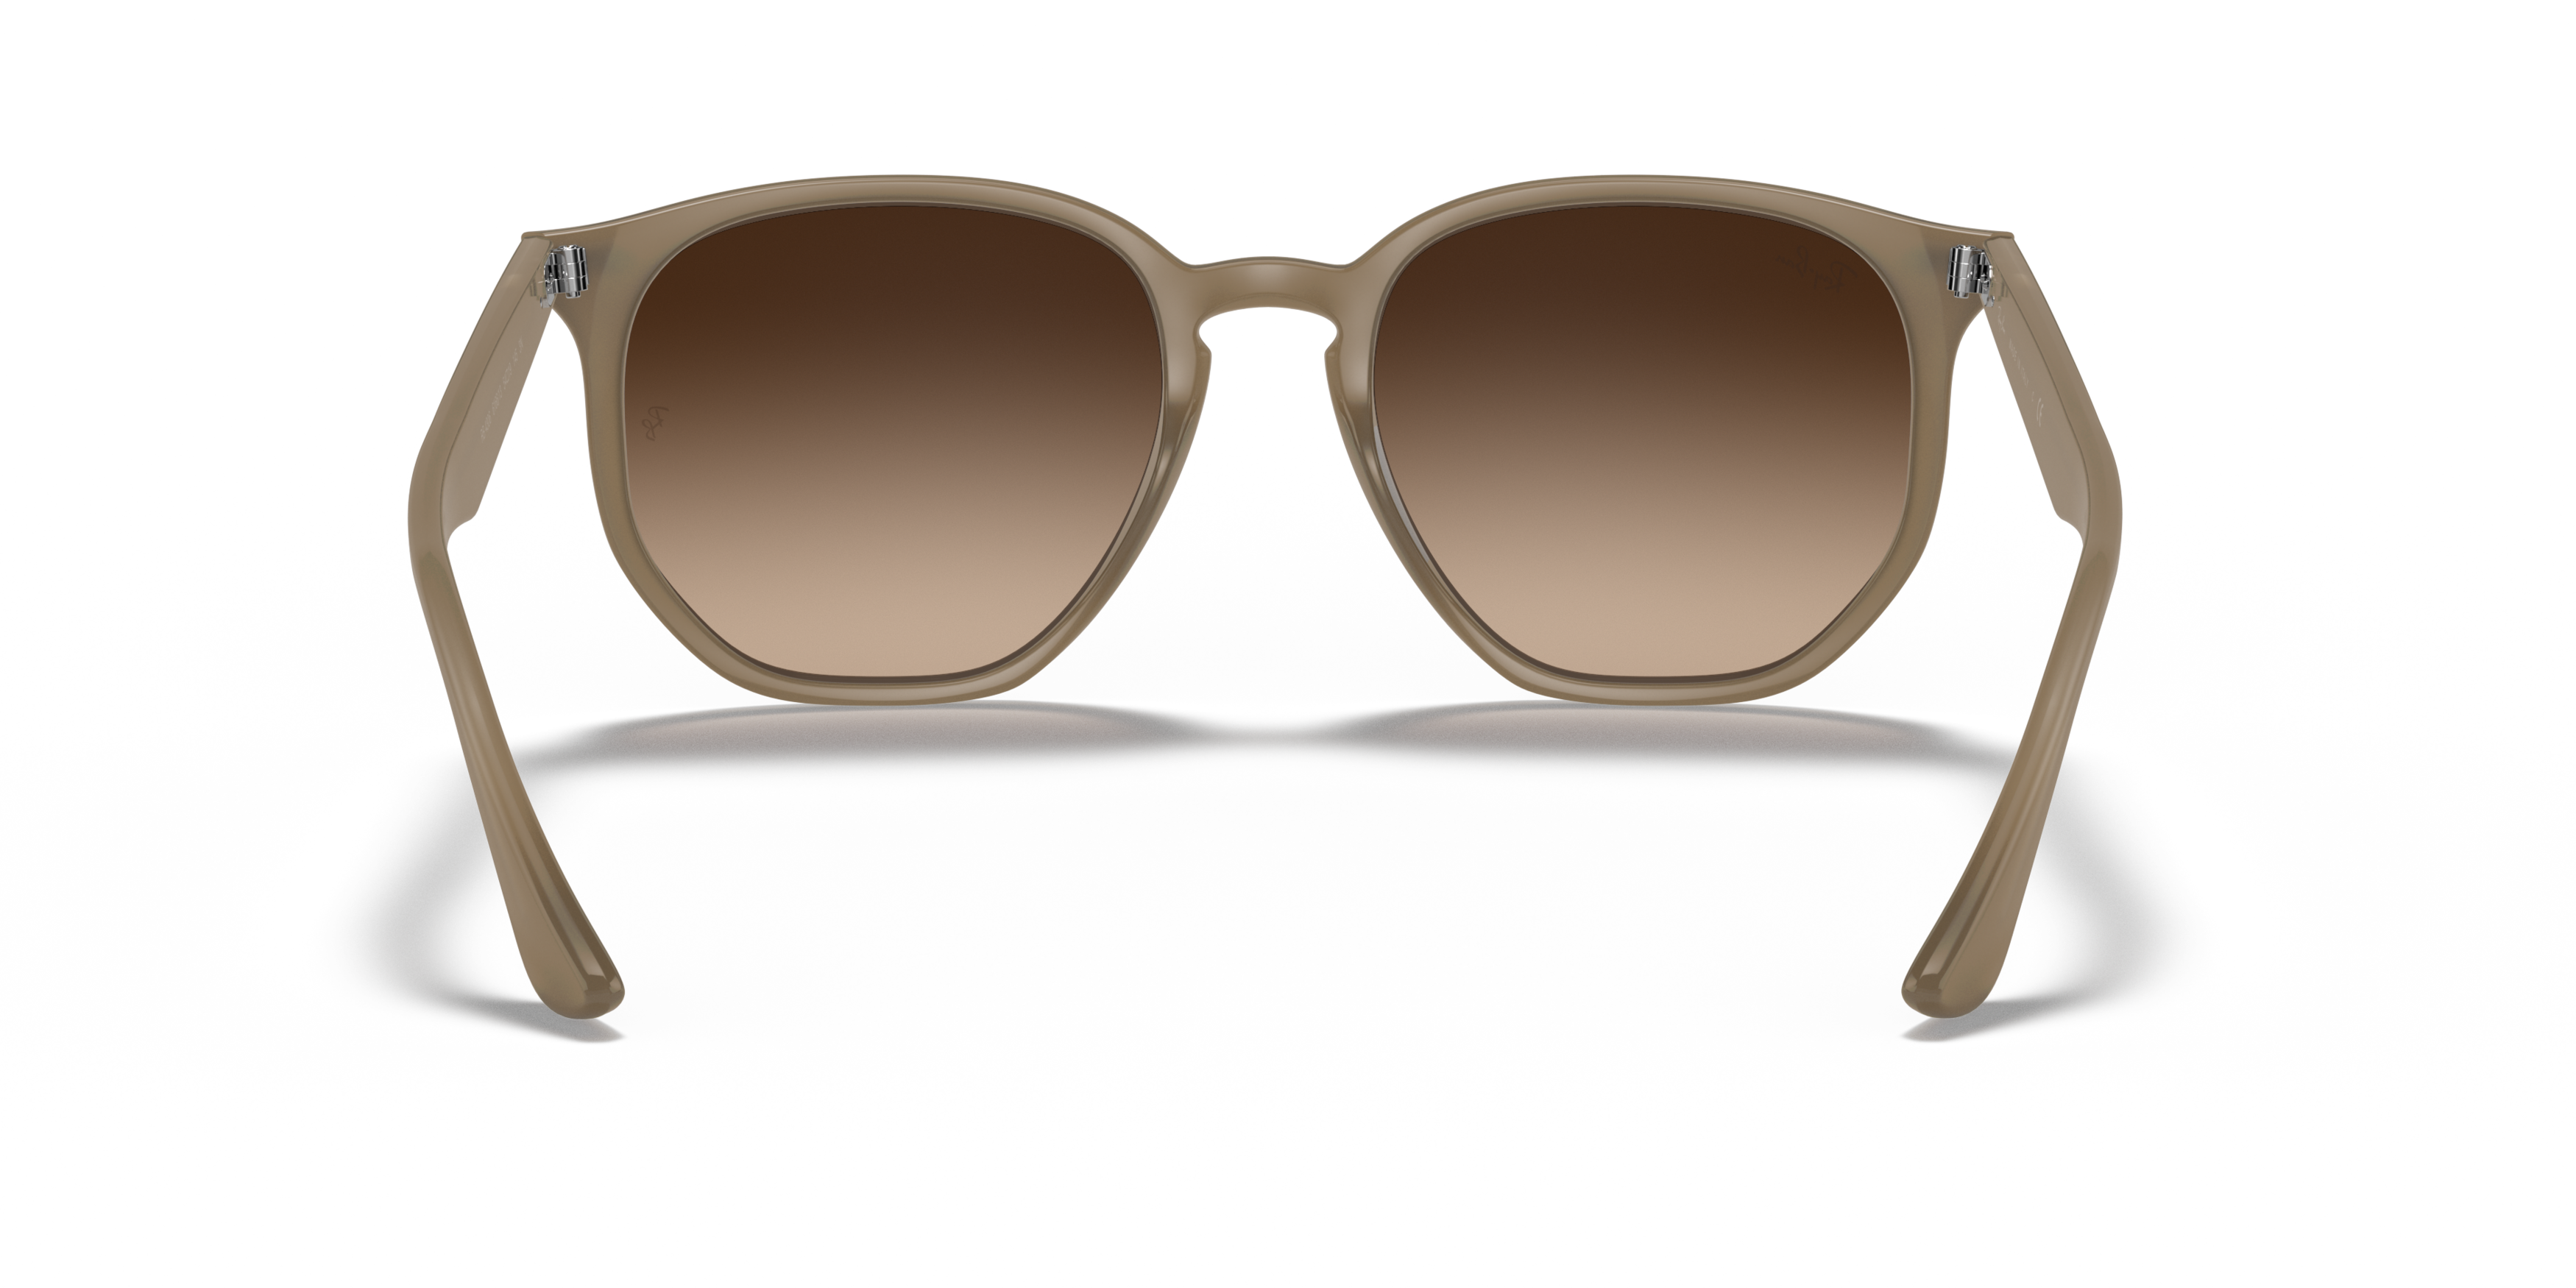 Detail02 Ray-Ban RB 4306 Sunglasses Brown / Transparent, Tortoise Shell